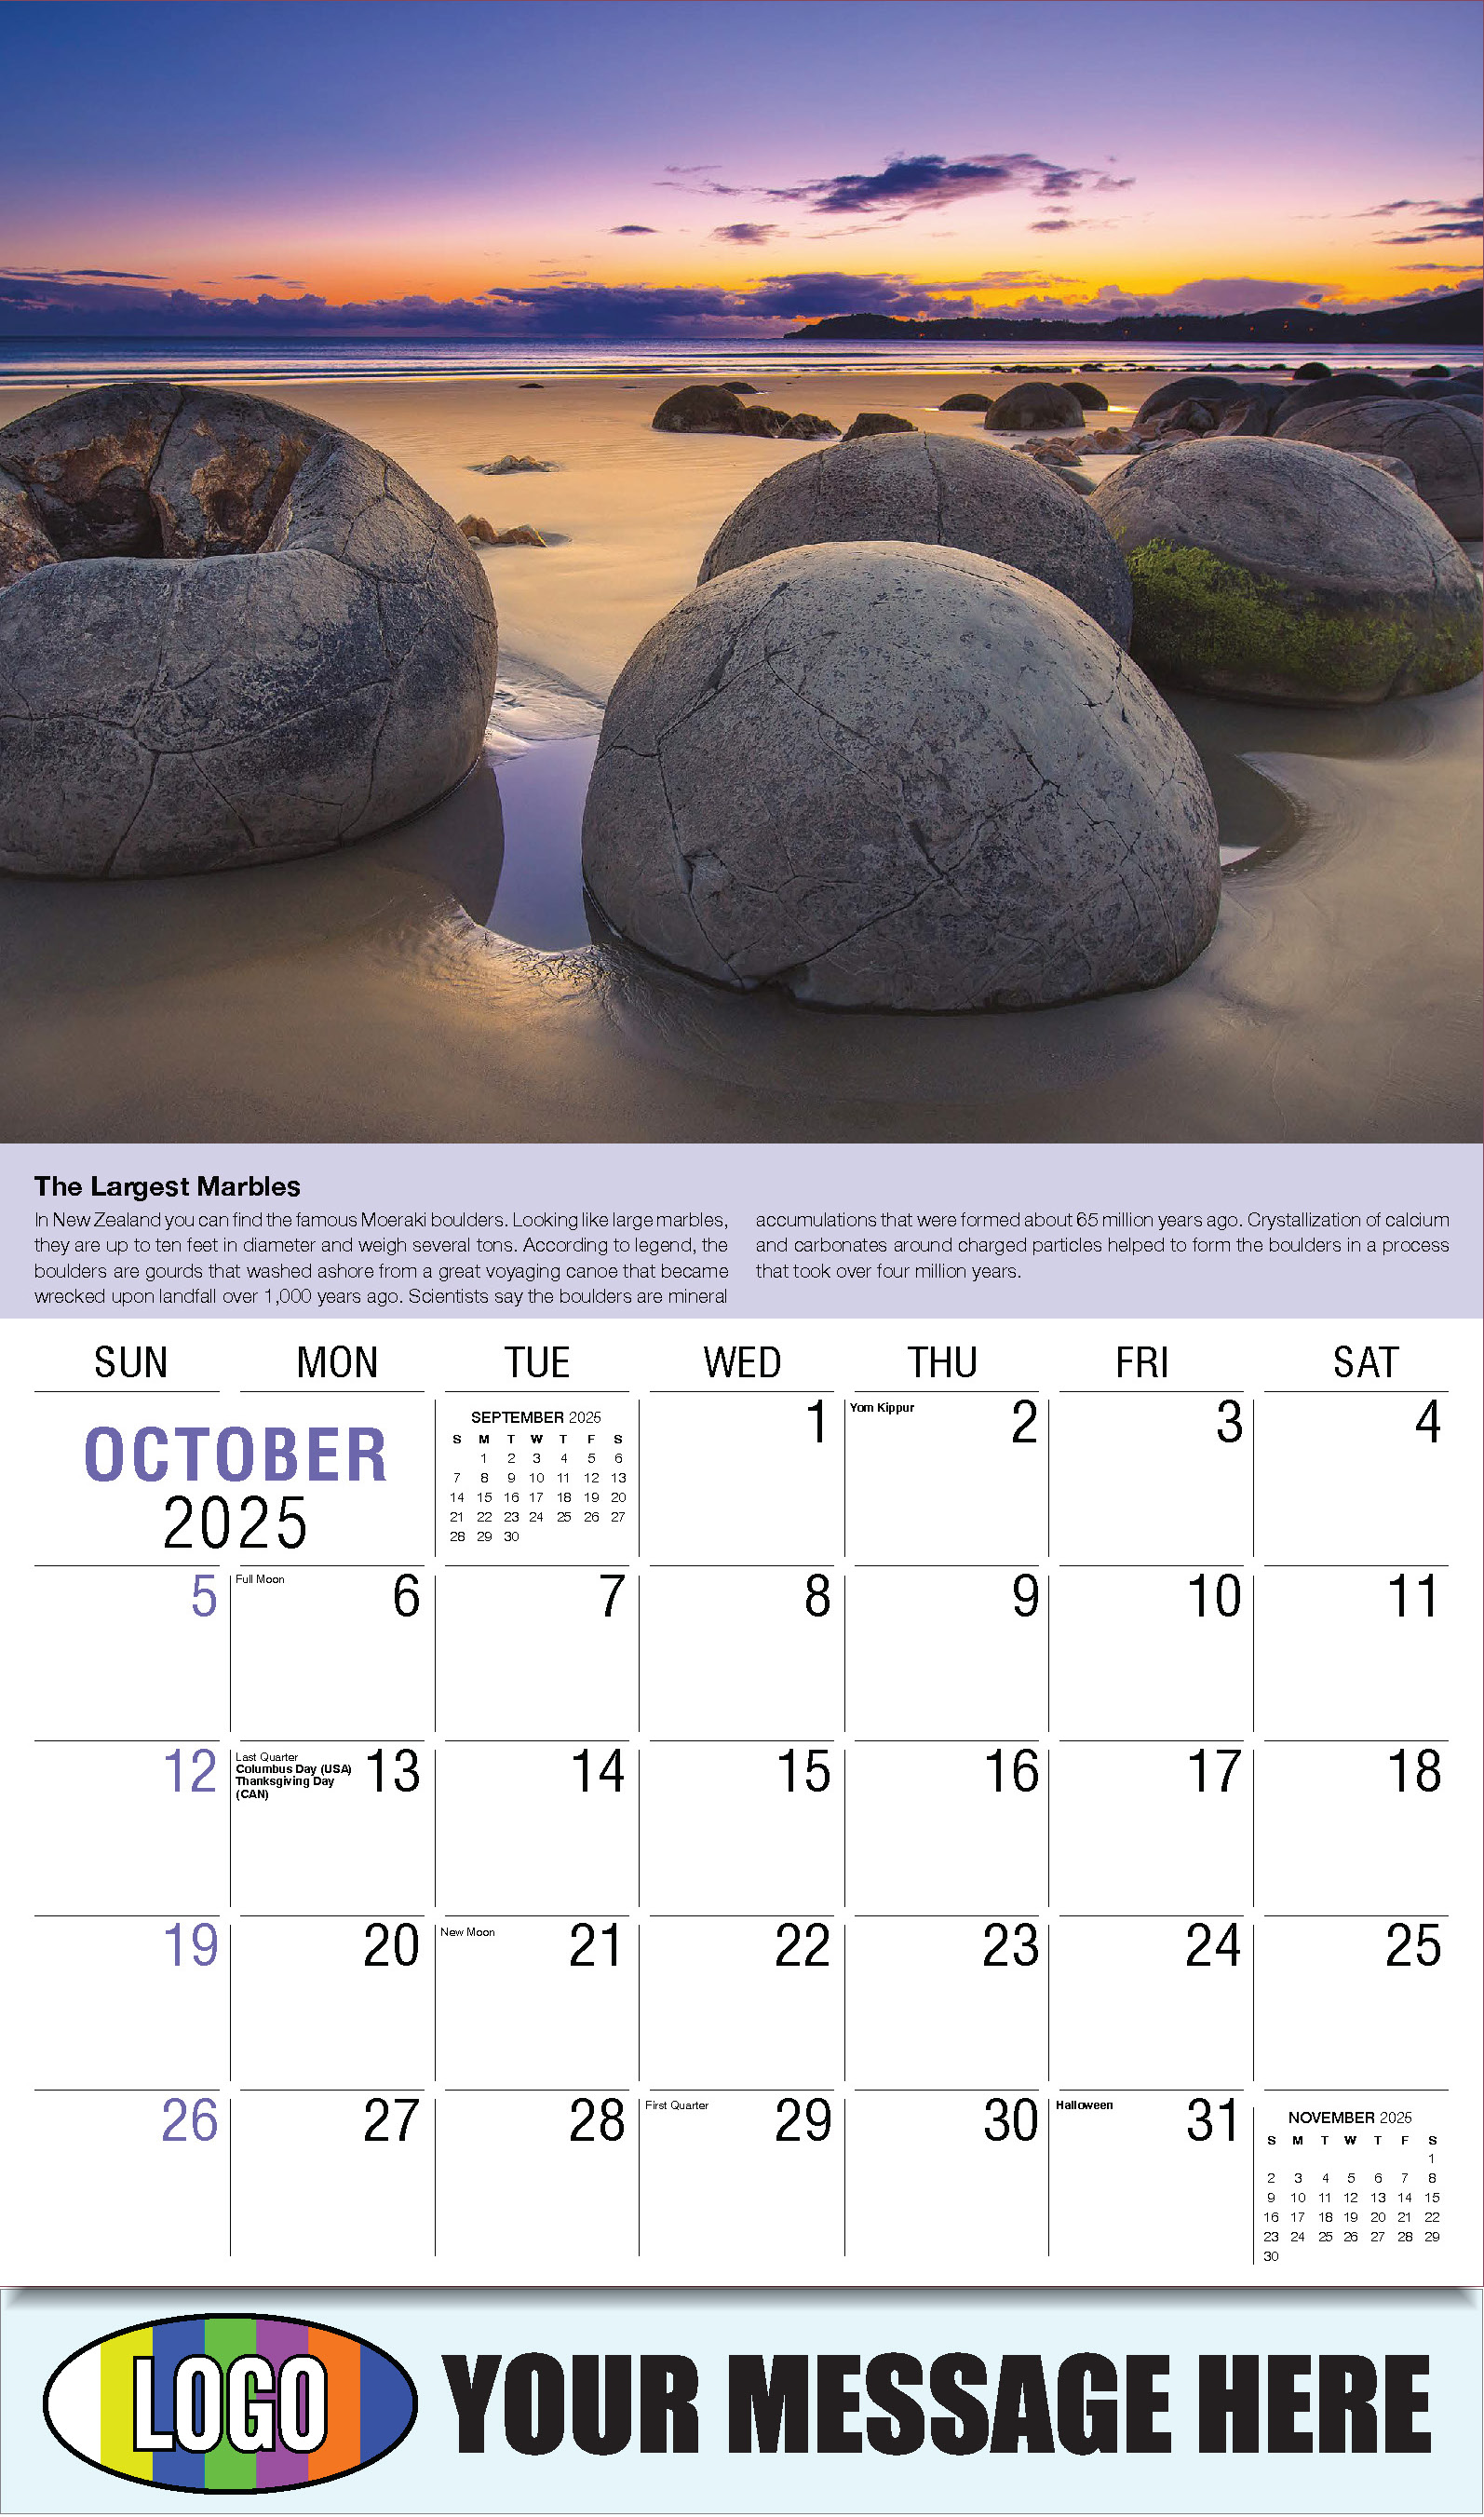 Planet Earth 2025 Business Promotional Wall Calendar - October